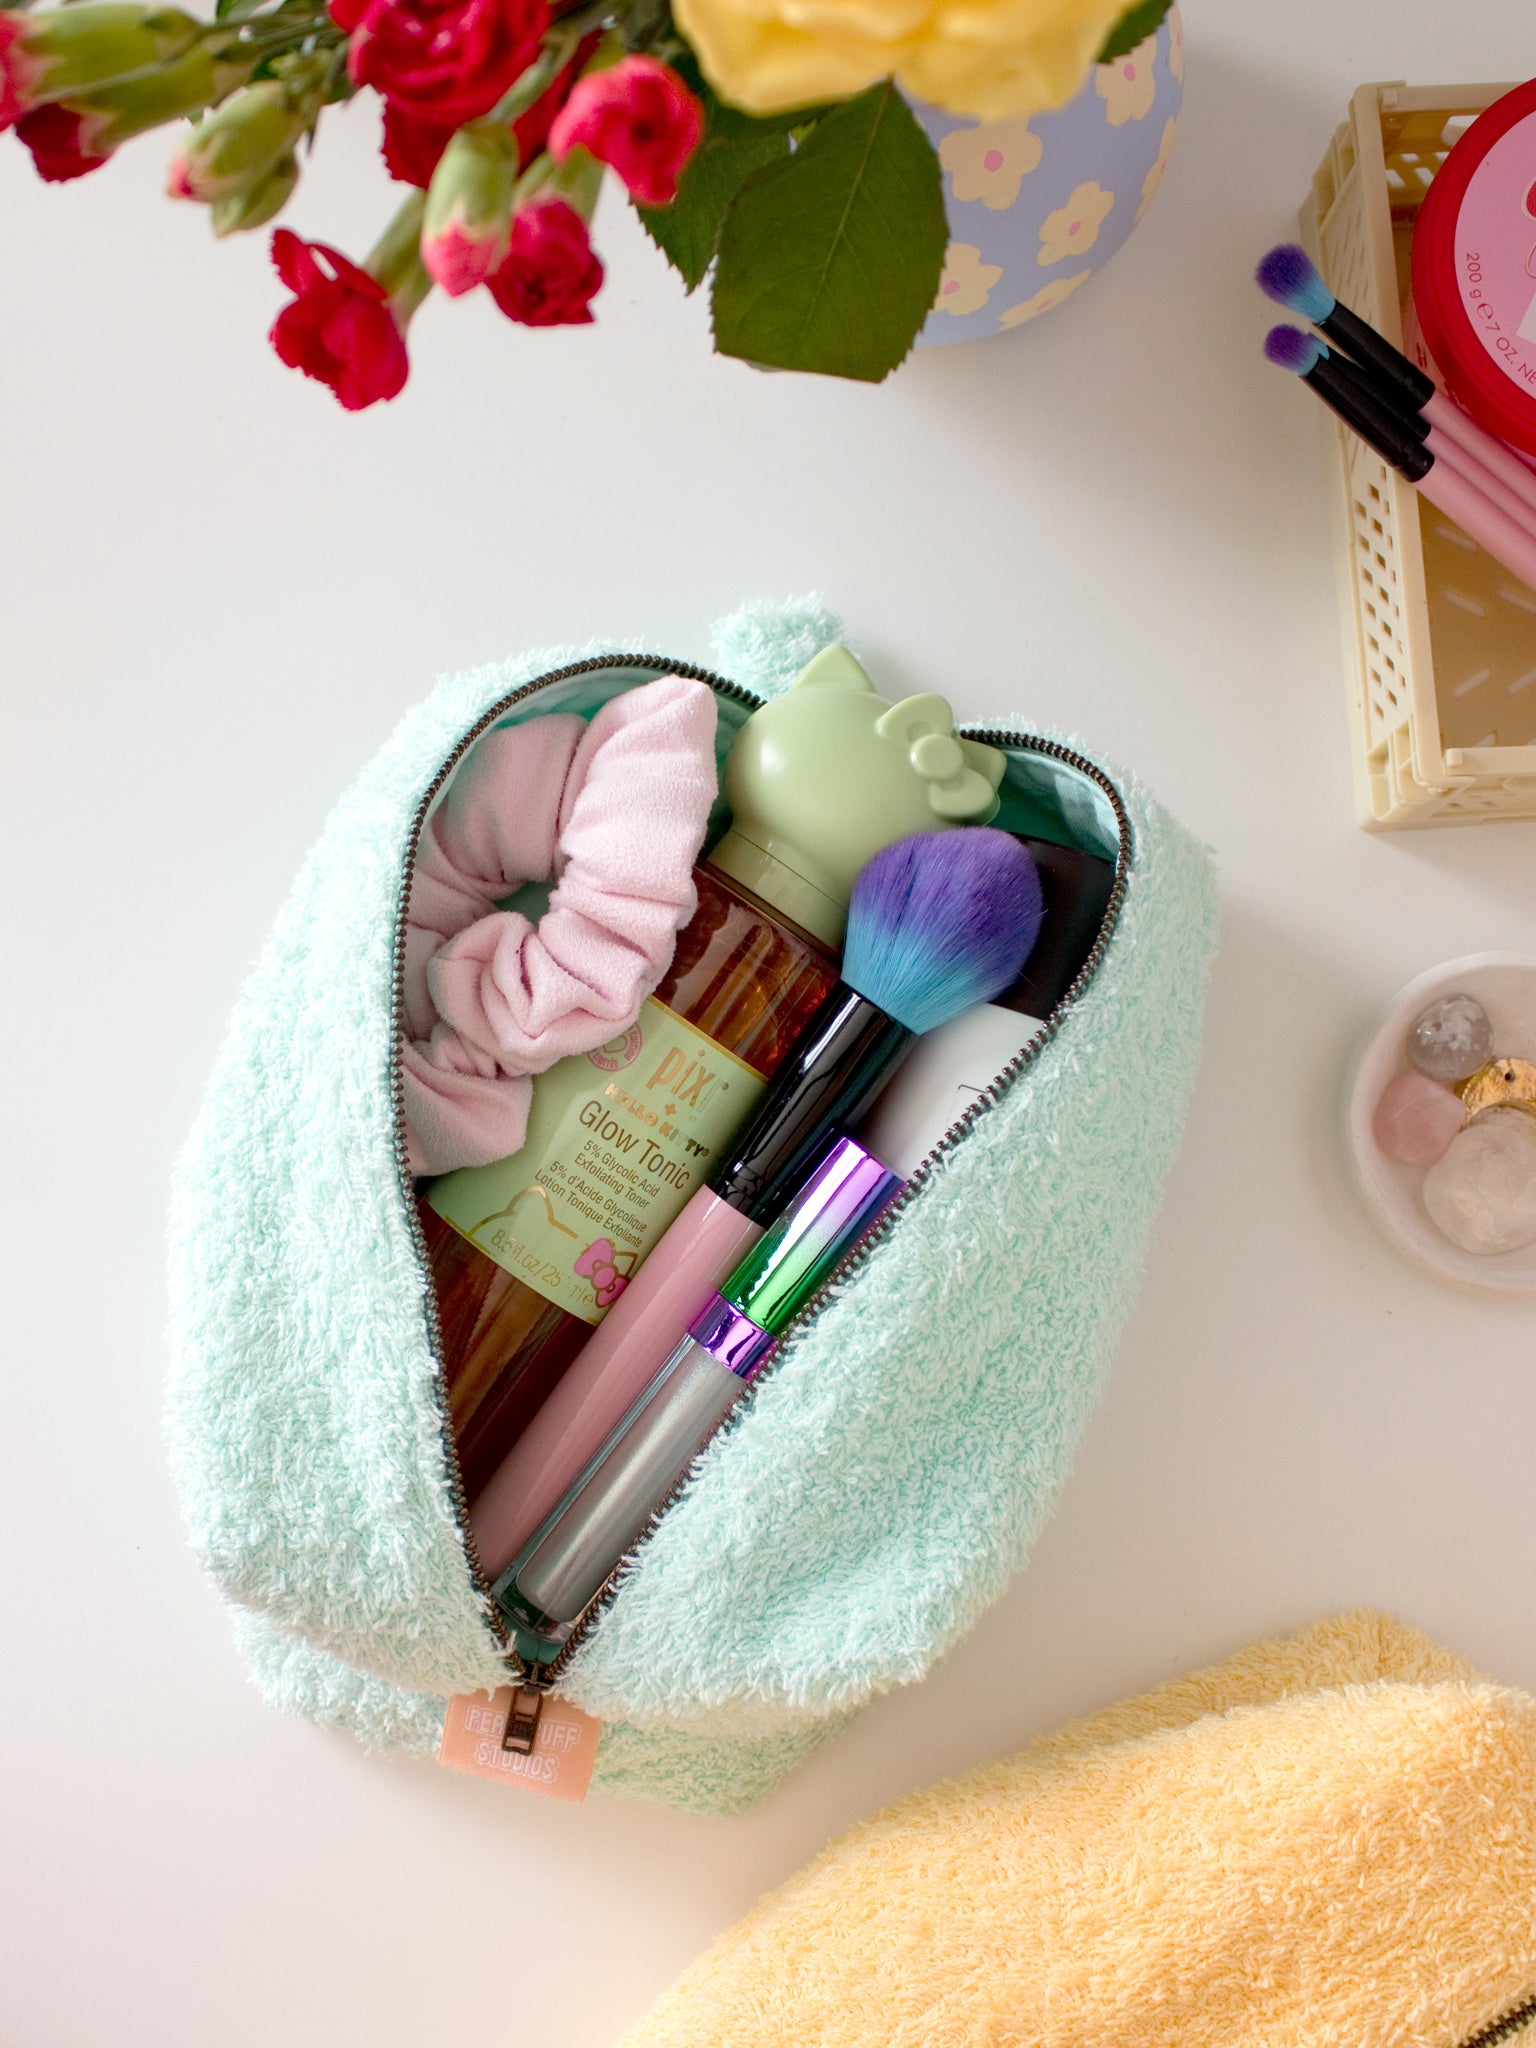 A mint green towelling makeup bag on a table, open to reveal beauty products.